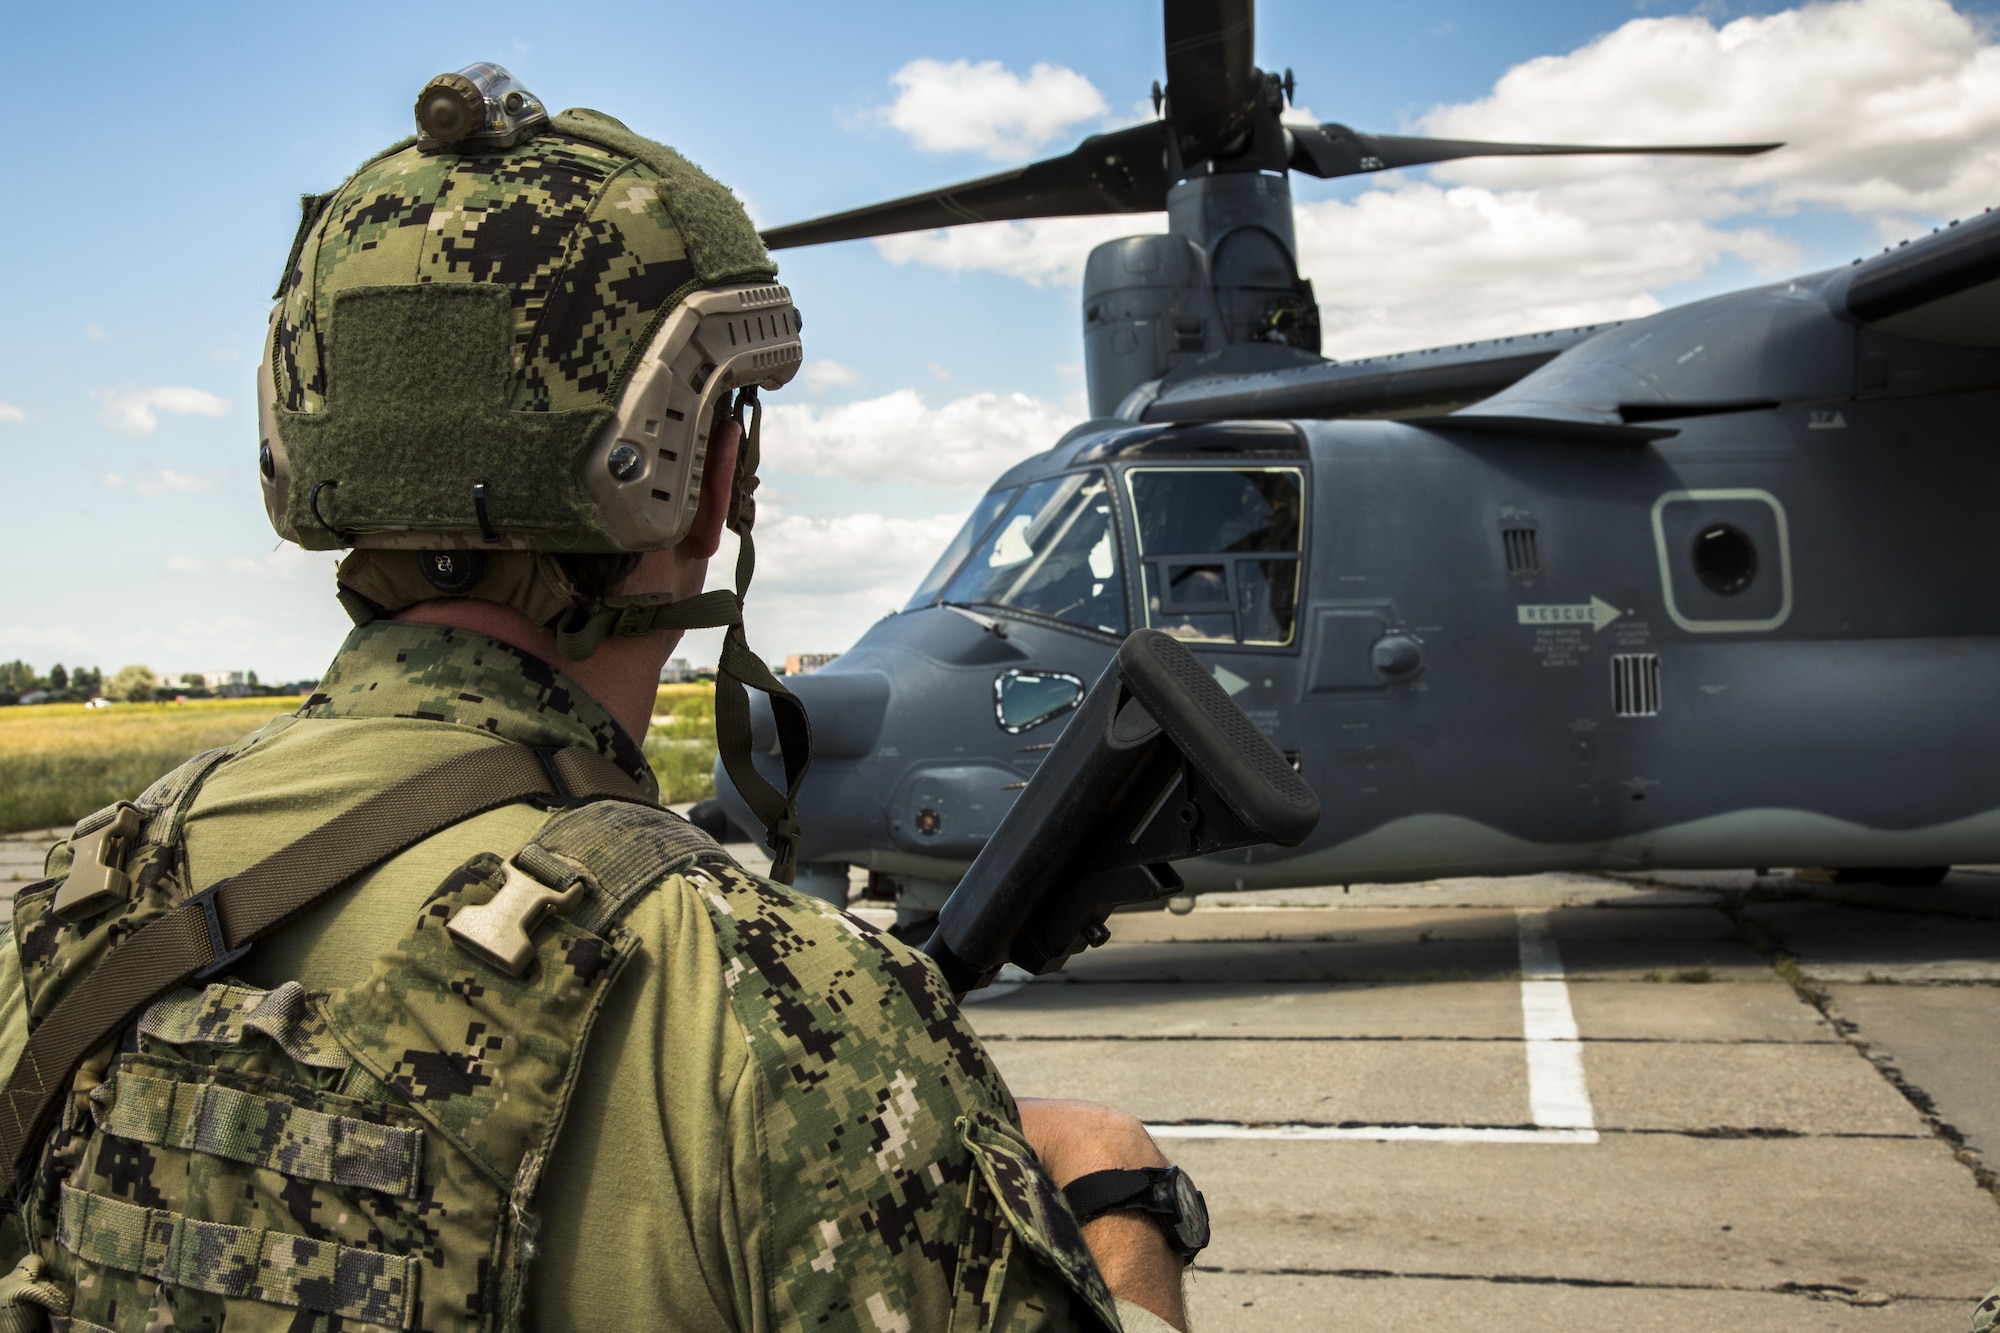 Ukrainian SOF prepare to board a U.S. CV-22 Osprey during exercise Sea Breeze 17, July 15, 2017 in Ukraine. Sea Breeze is a U.S. and Ukraine co-hosted multinational maritime exercise held in the Black Sea and is designed to enhance interoperability of participating nations and strengthen maritime security within the region. (Photo by U.S. Army Sgt. Jeffrey Lopez)